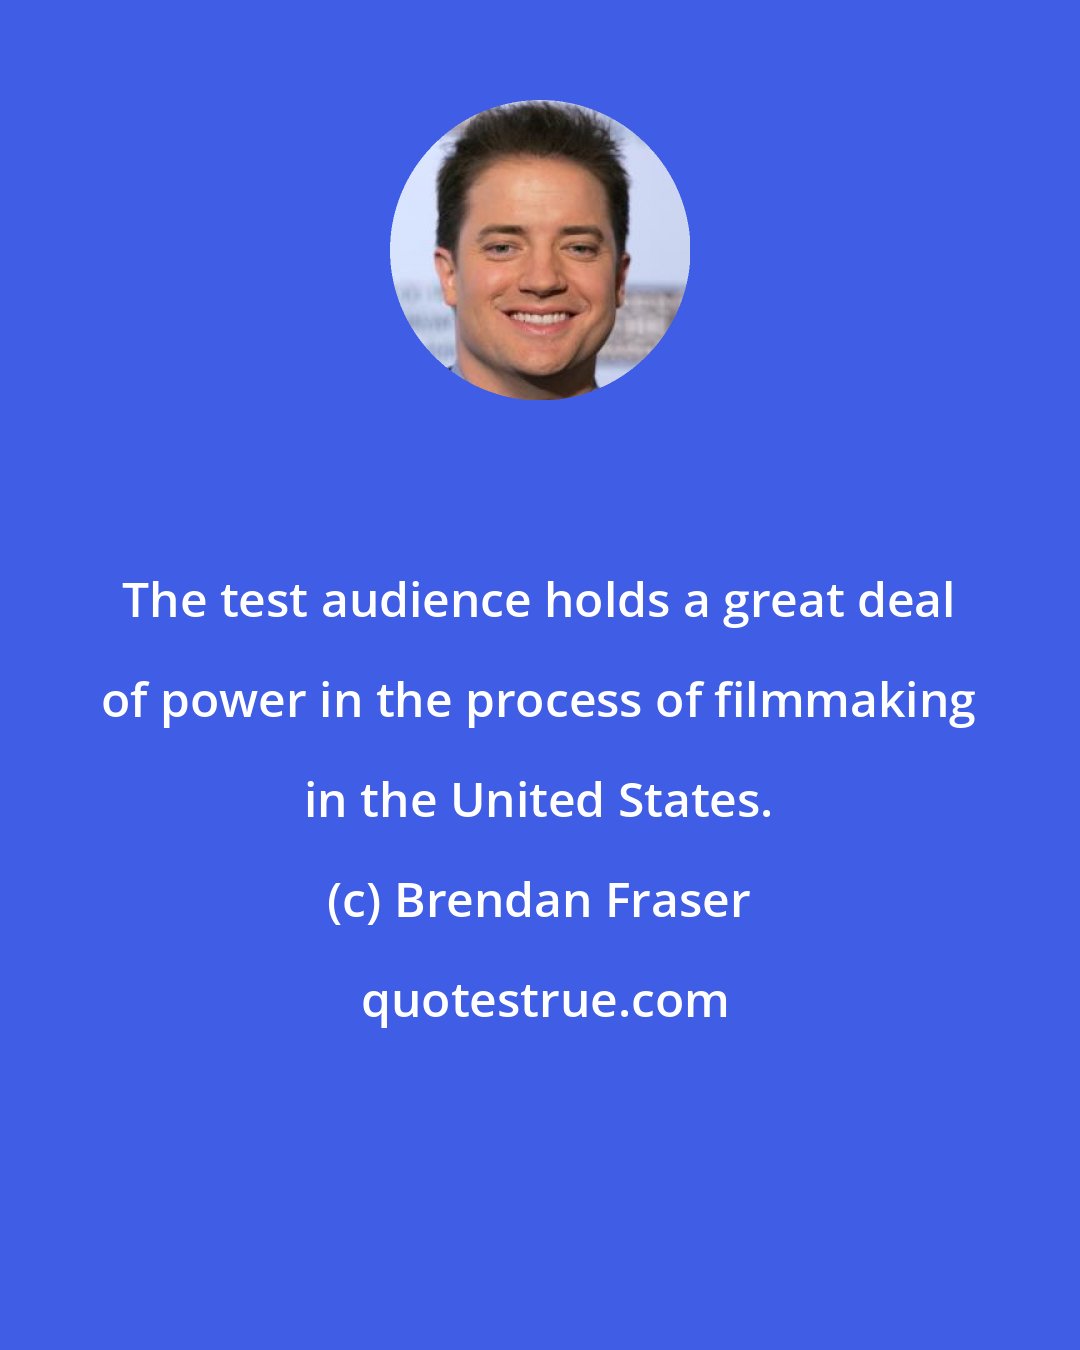 Brendan Fraser: The test audience holds a great deal of power in the process of filmmaking in the United States.